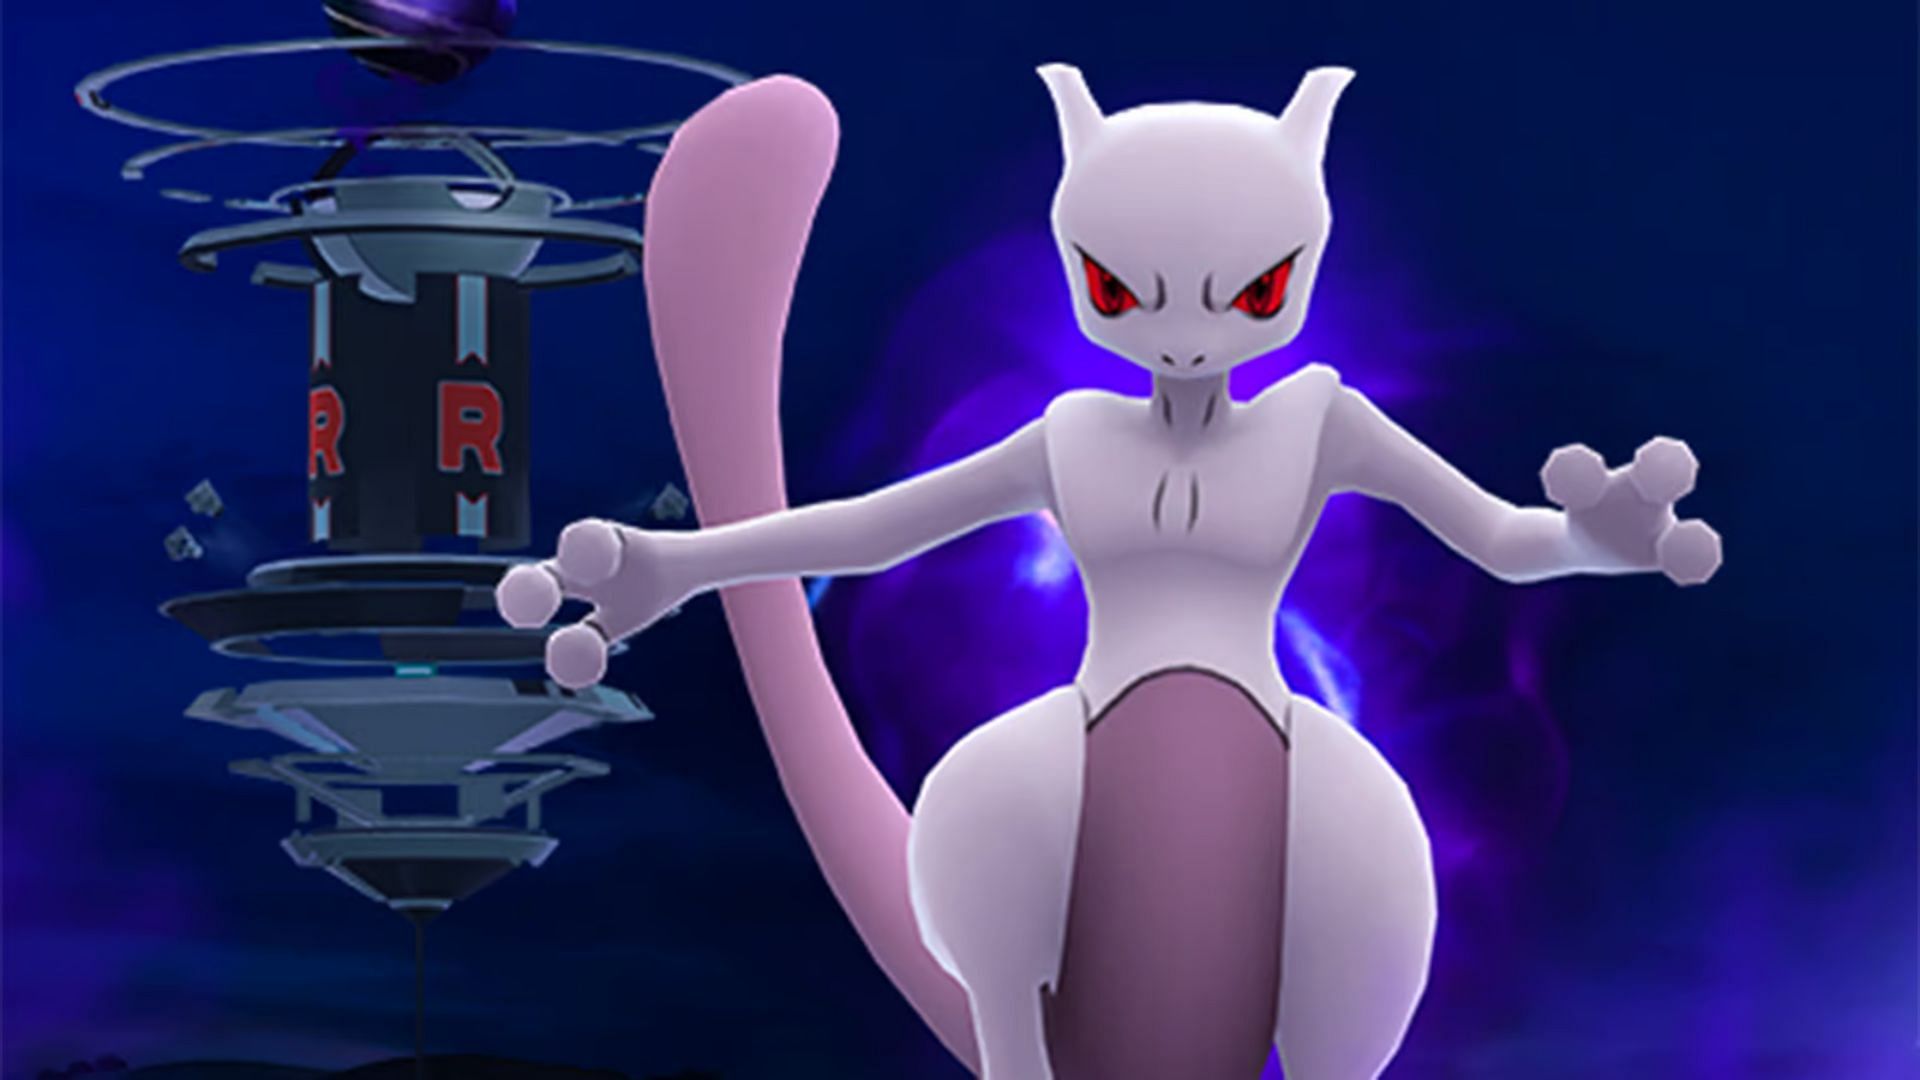 Screengrab from Shadow Mewtwo promotional video (Image via Niantic)